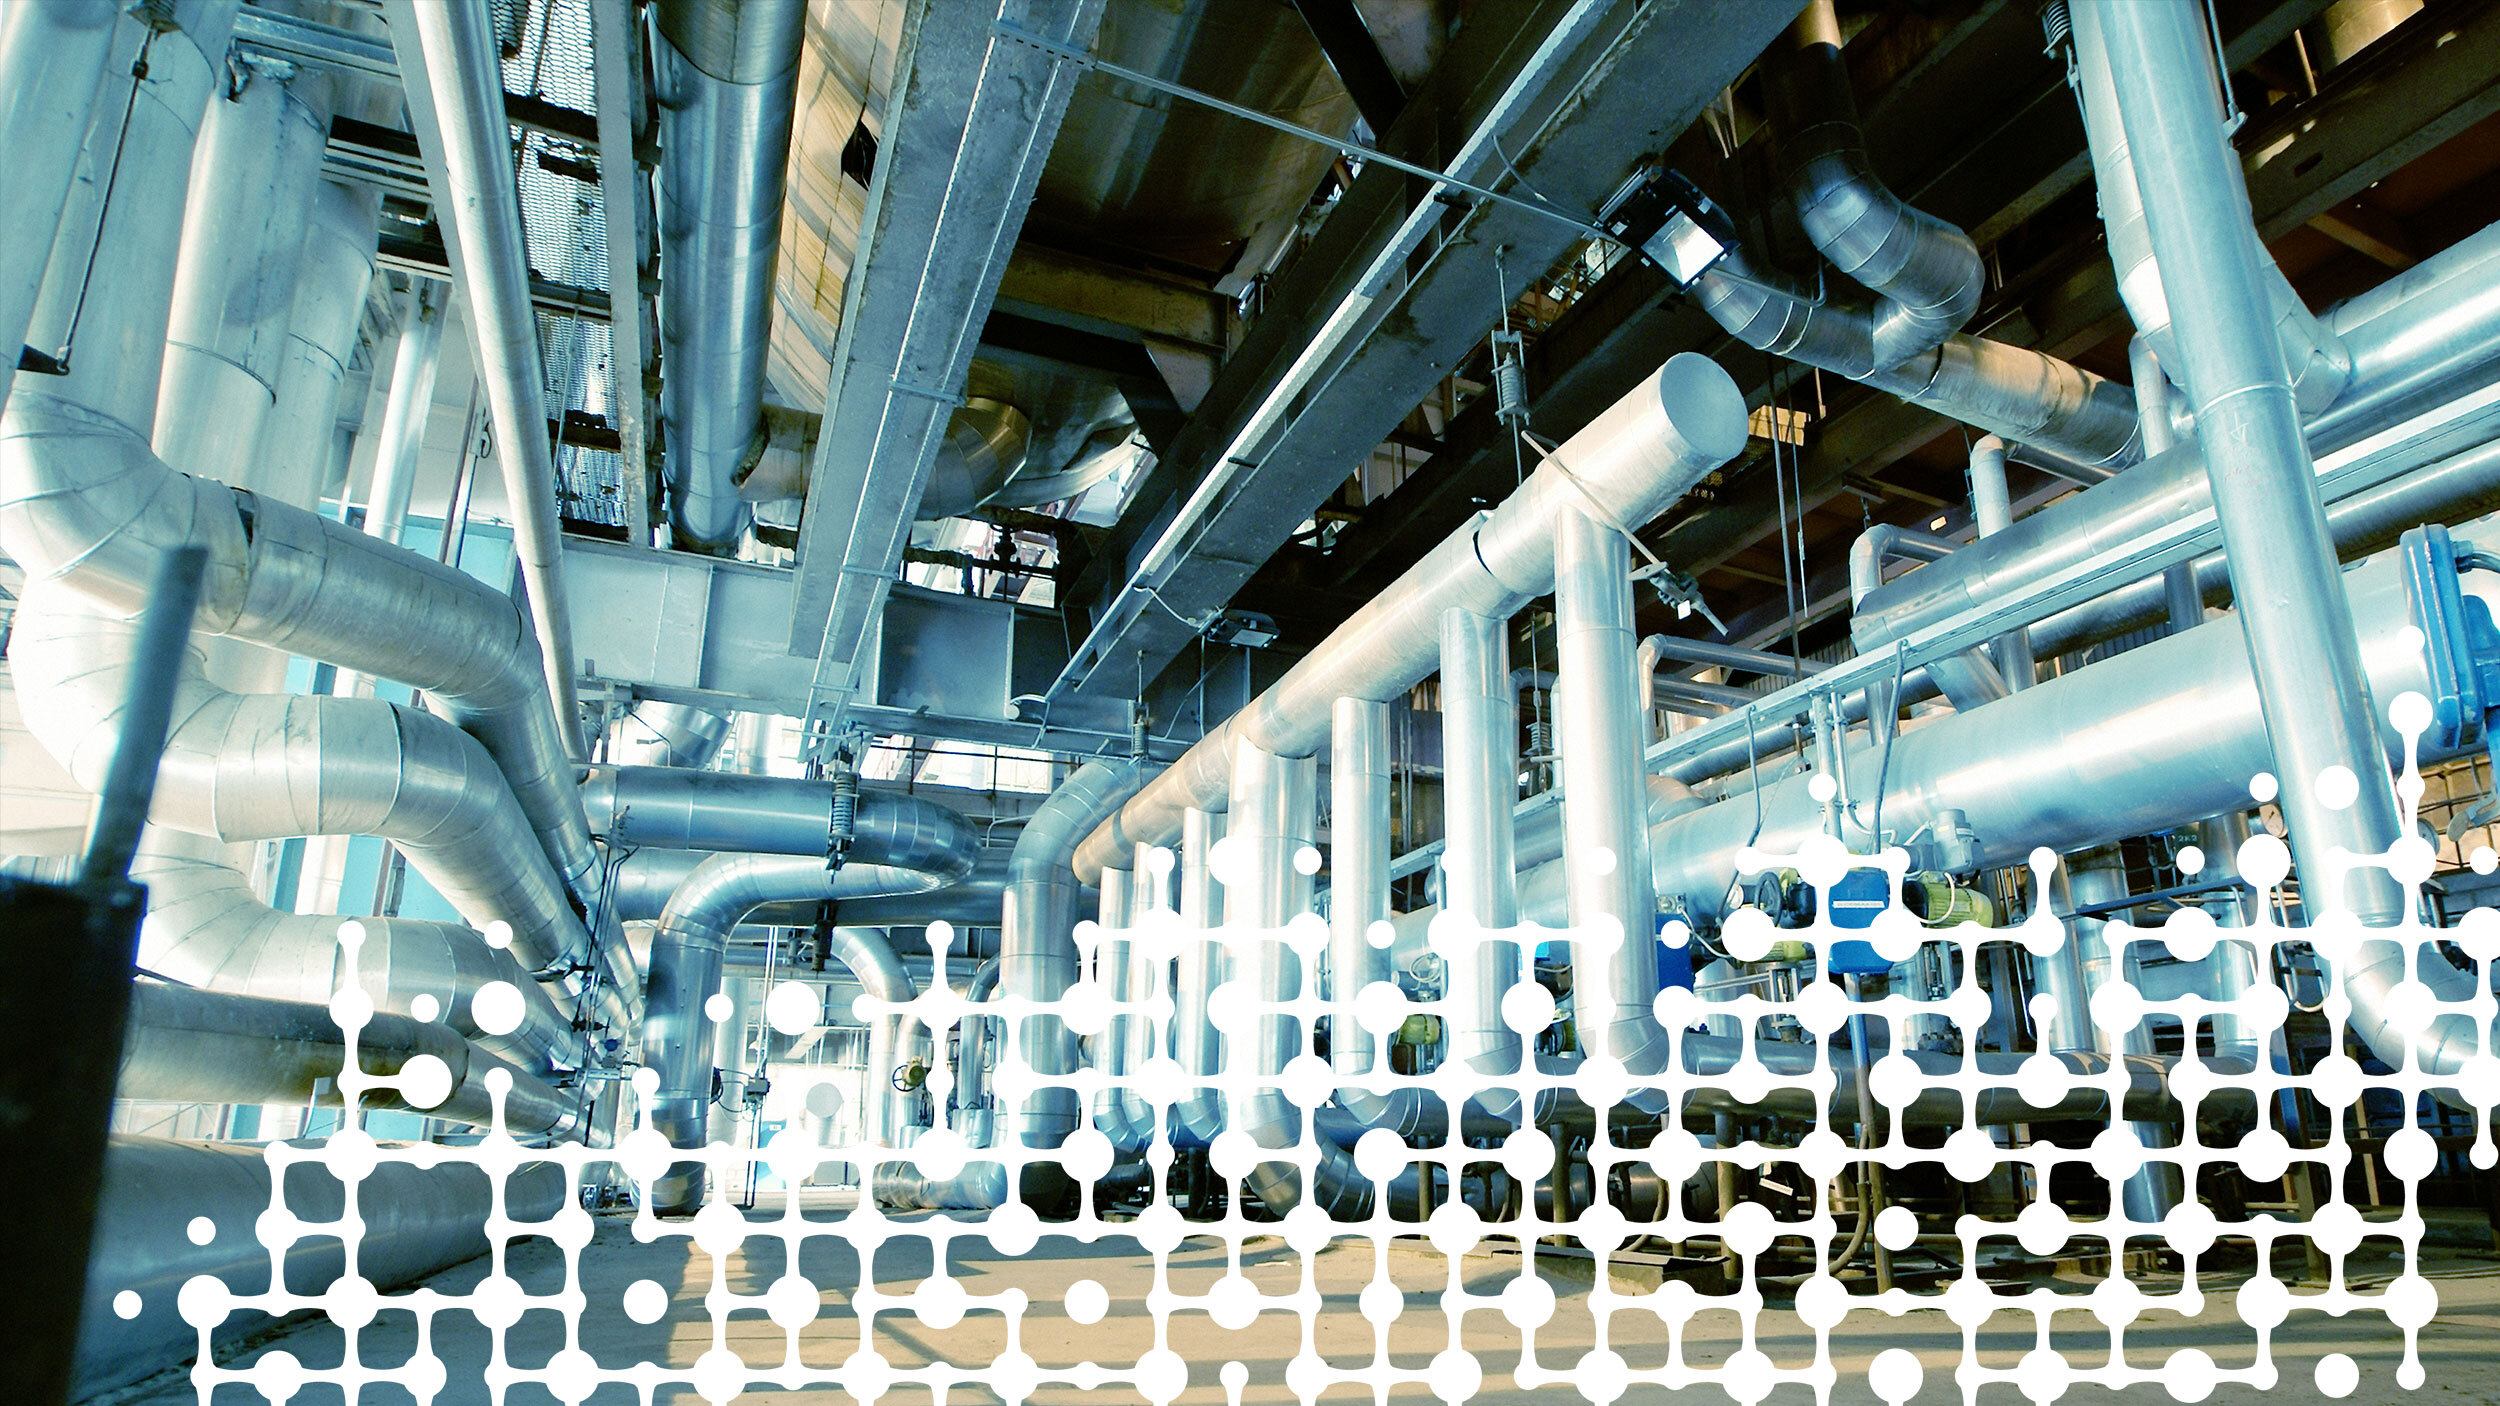 Optimize carbon storage with advanced solutions